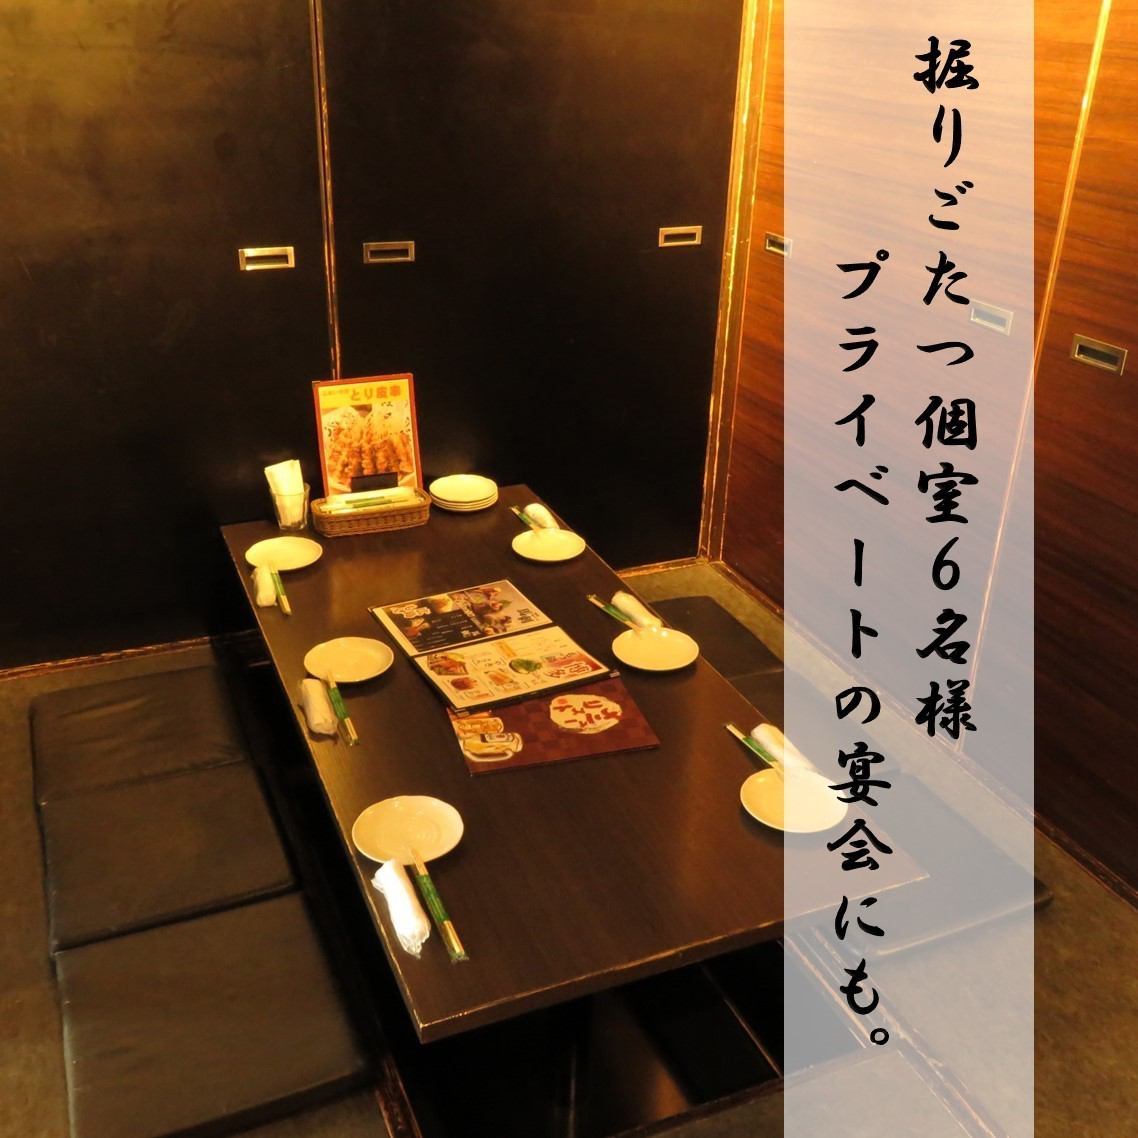 Fully equipped with private rooms! We are also taking measures against infectious diseases♪